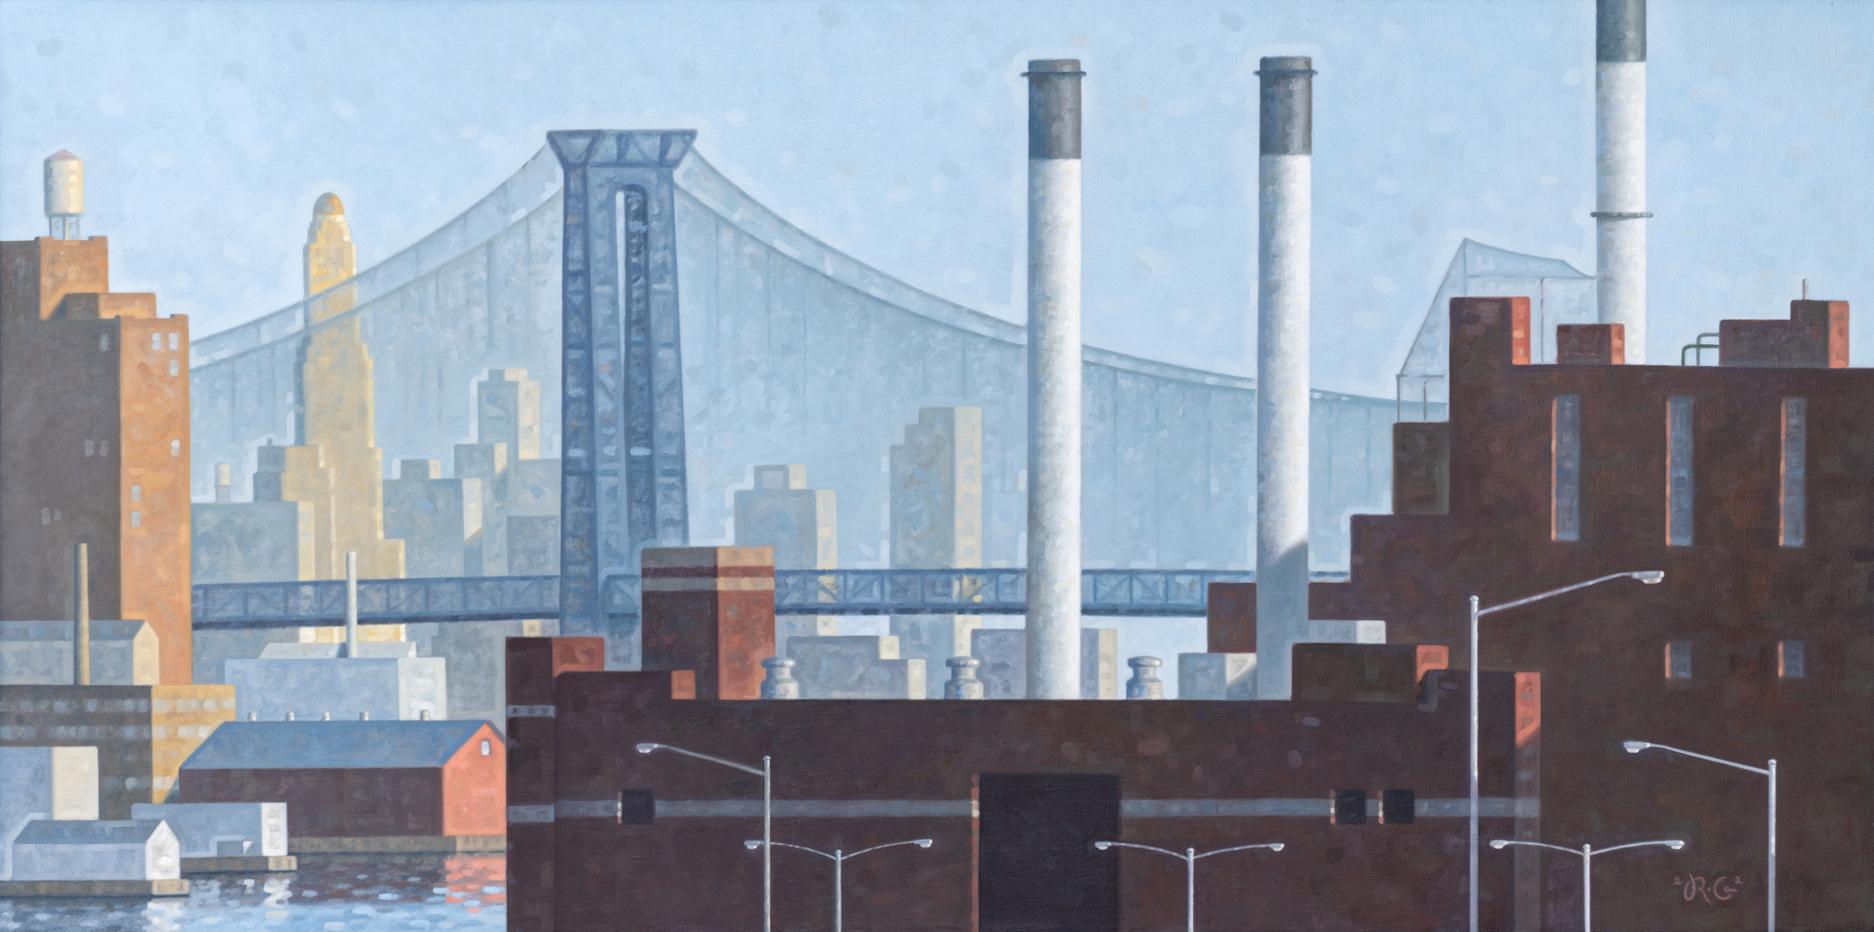 East River, Con Ed, Panorama (Cityscape of Brooklyn, Williamsburg Bridge) - Painting by Robert Goldstrom